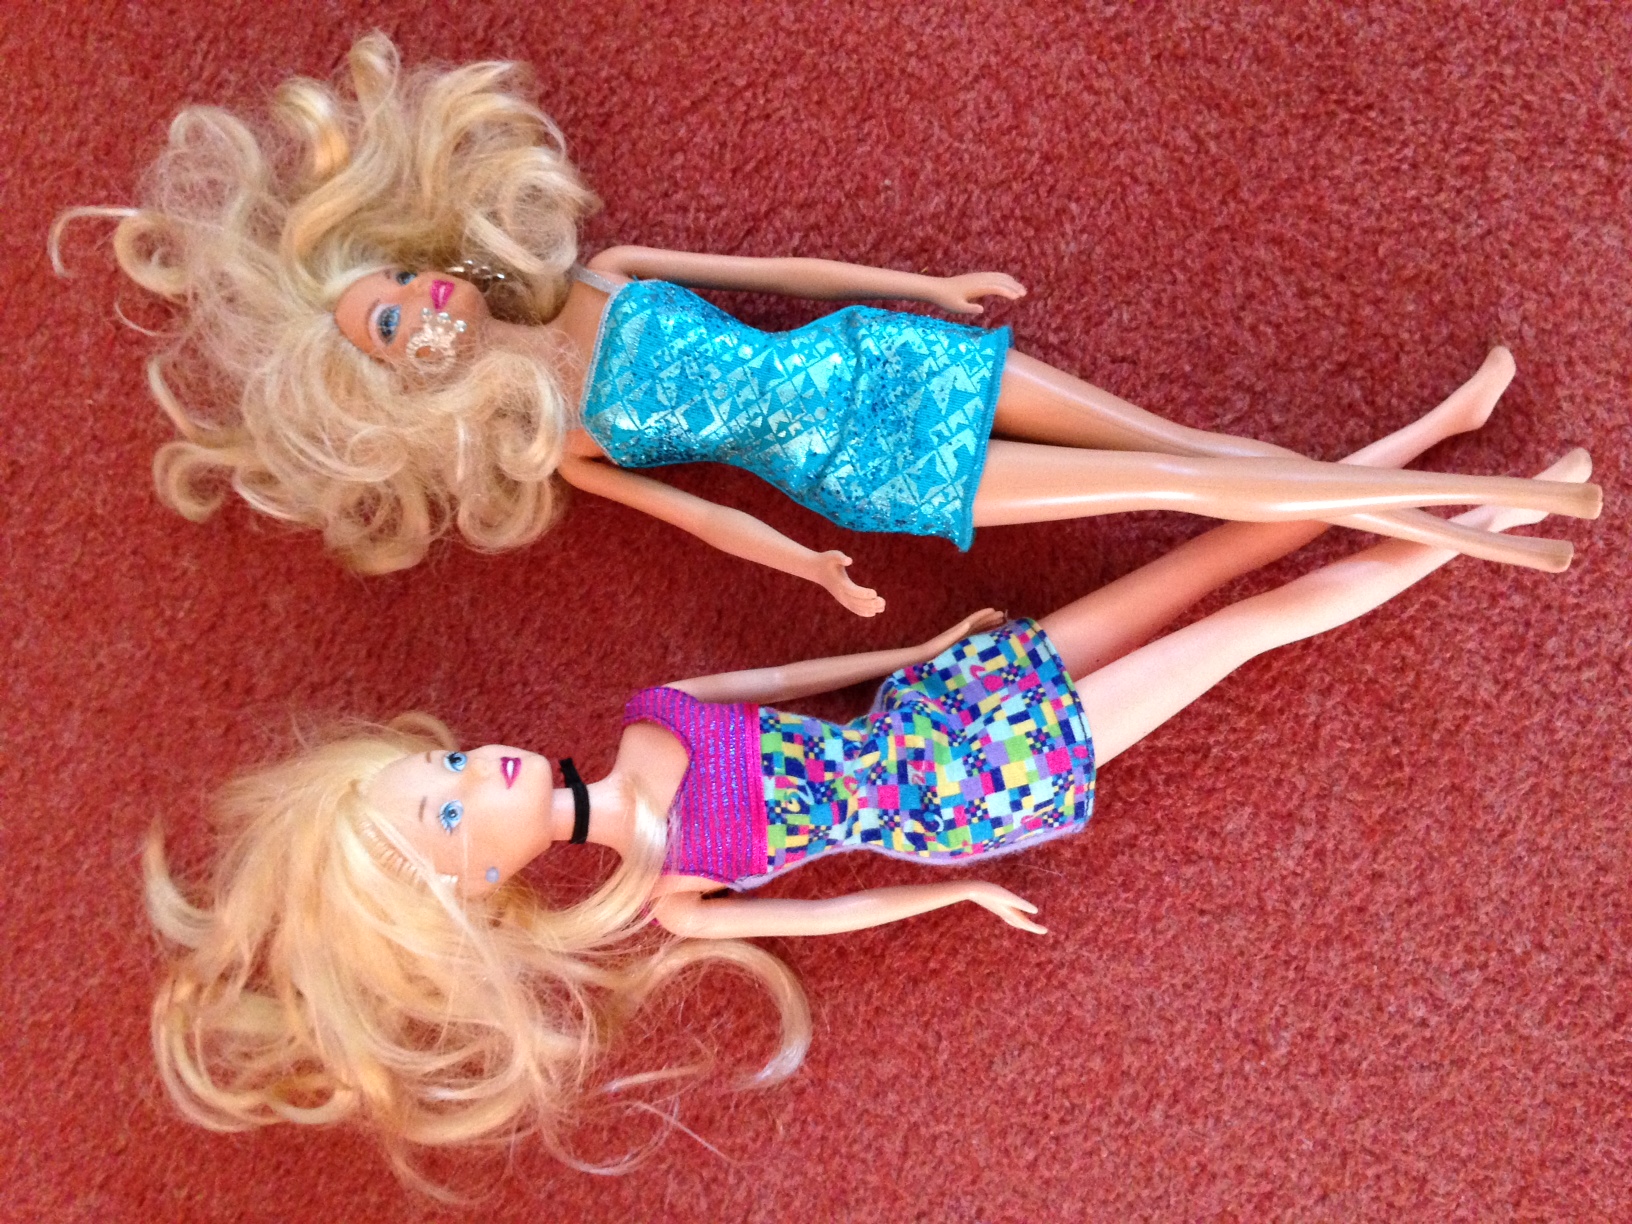 Hypersexed Barbie...just one small step to Miley Cyrus at the 2013 VMA's